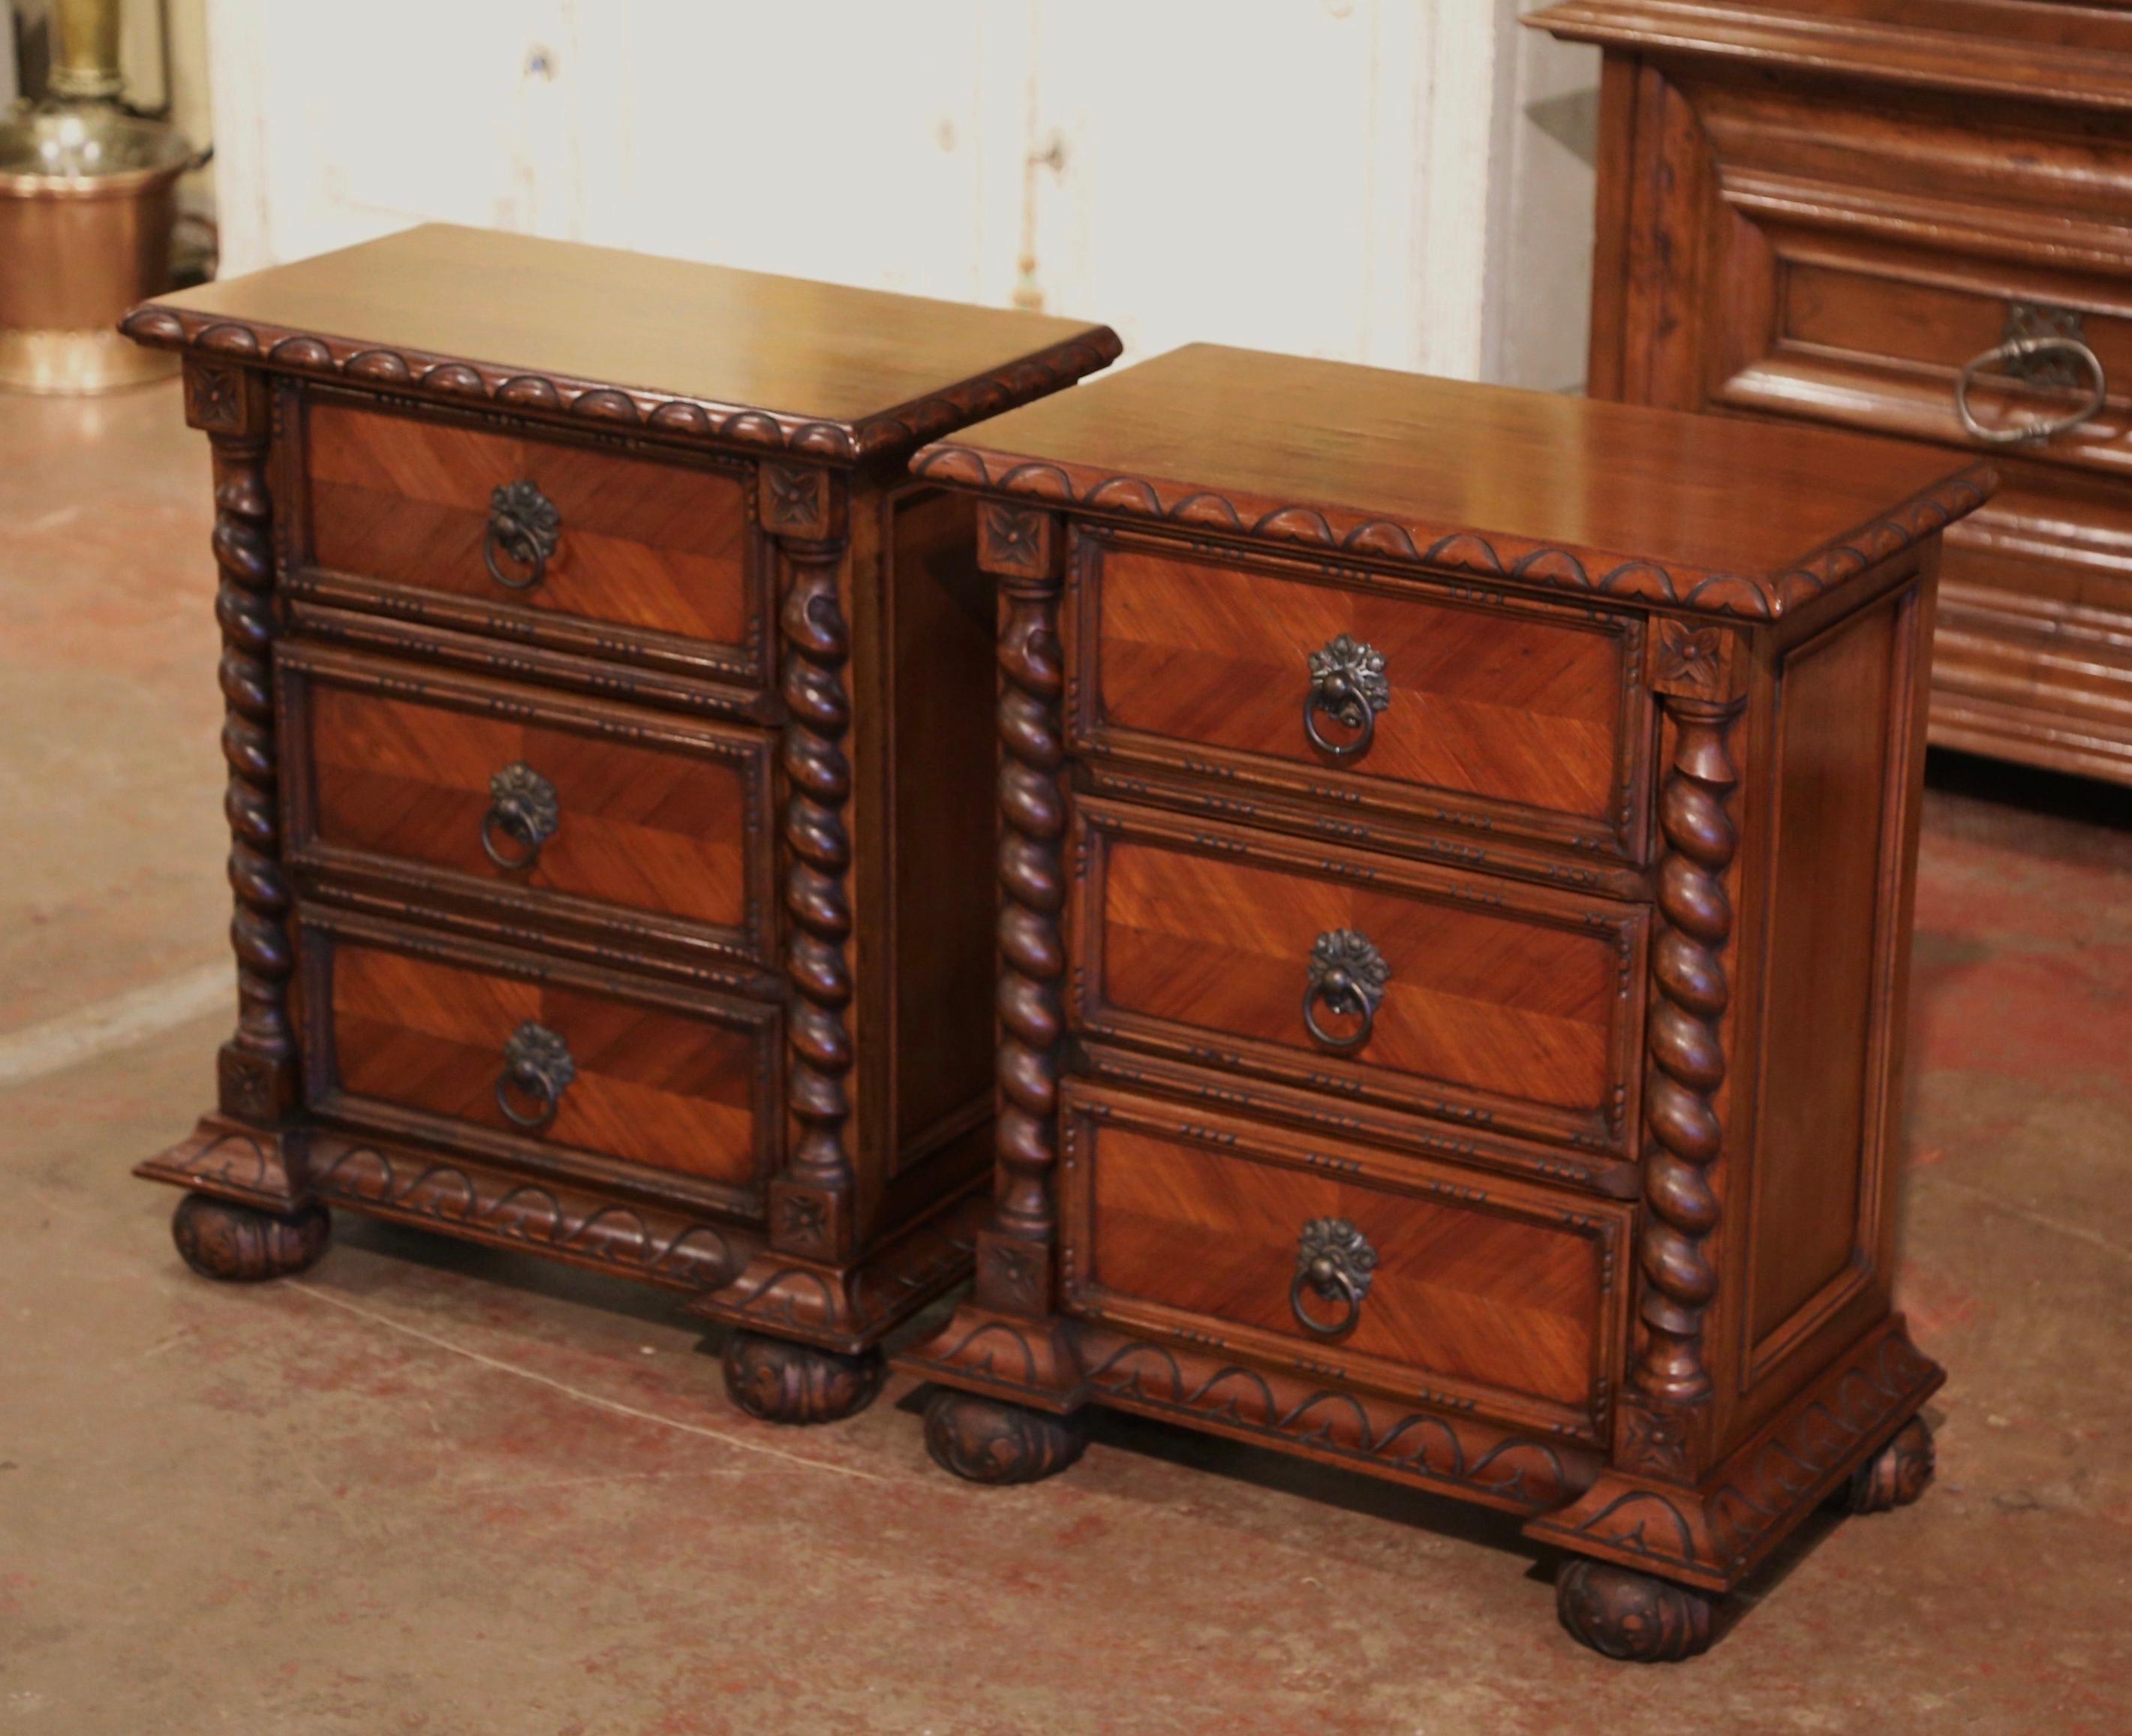 Decorate a master bedroom with this elegant pair of Baroque nightstands. Crafted in France circa 1950, each fruit wood chest stands on bun feet over a carved molded base ending with bracket corners. Each cabinet is dressed with barley twist pilaster